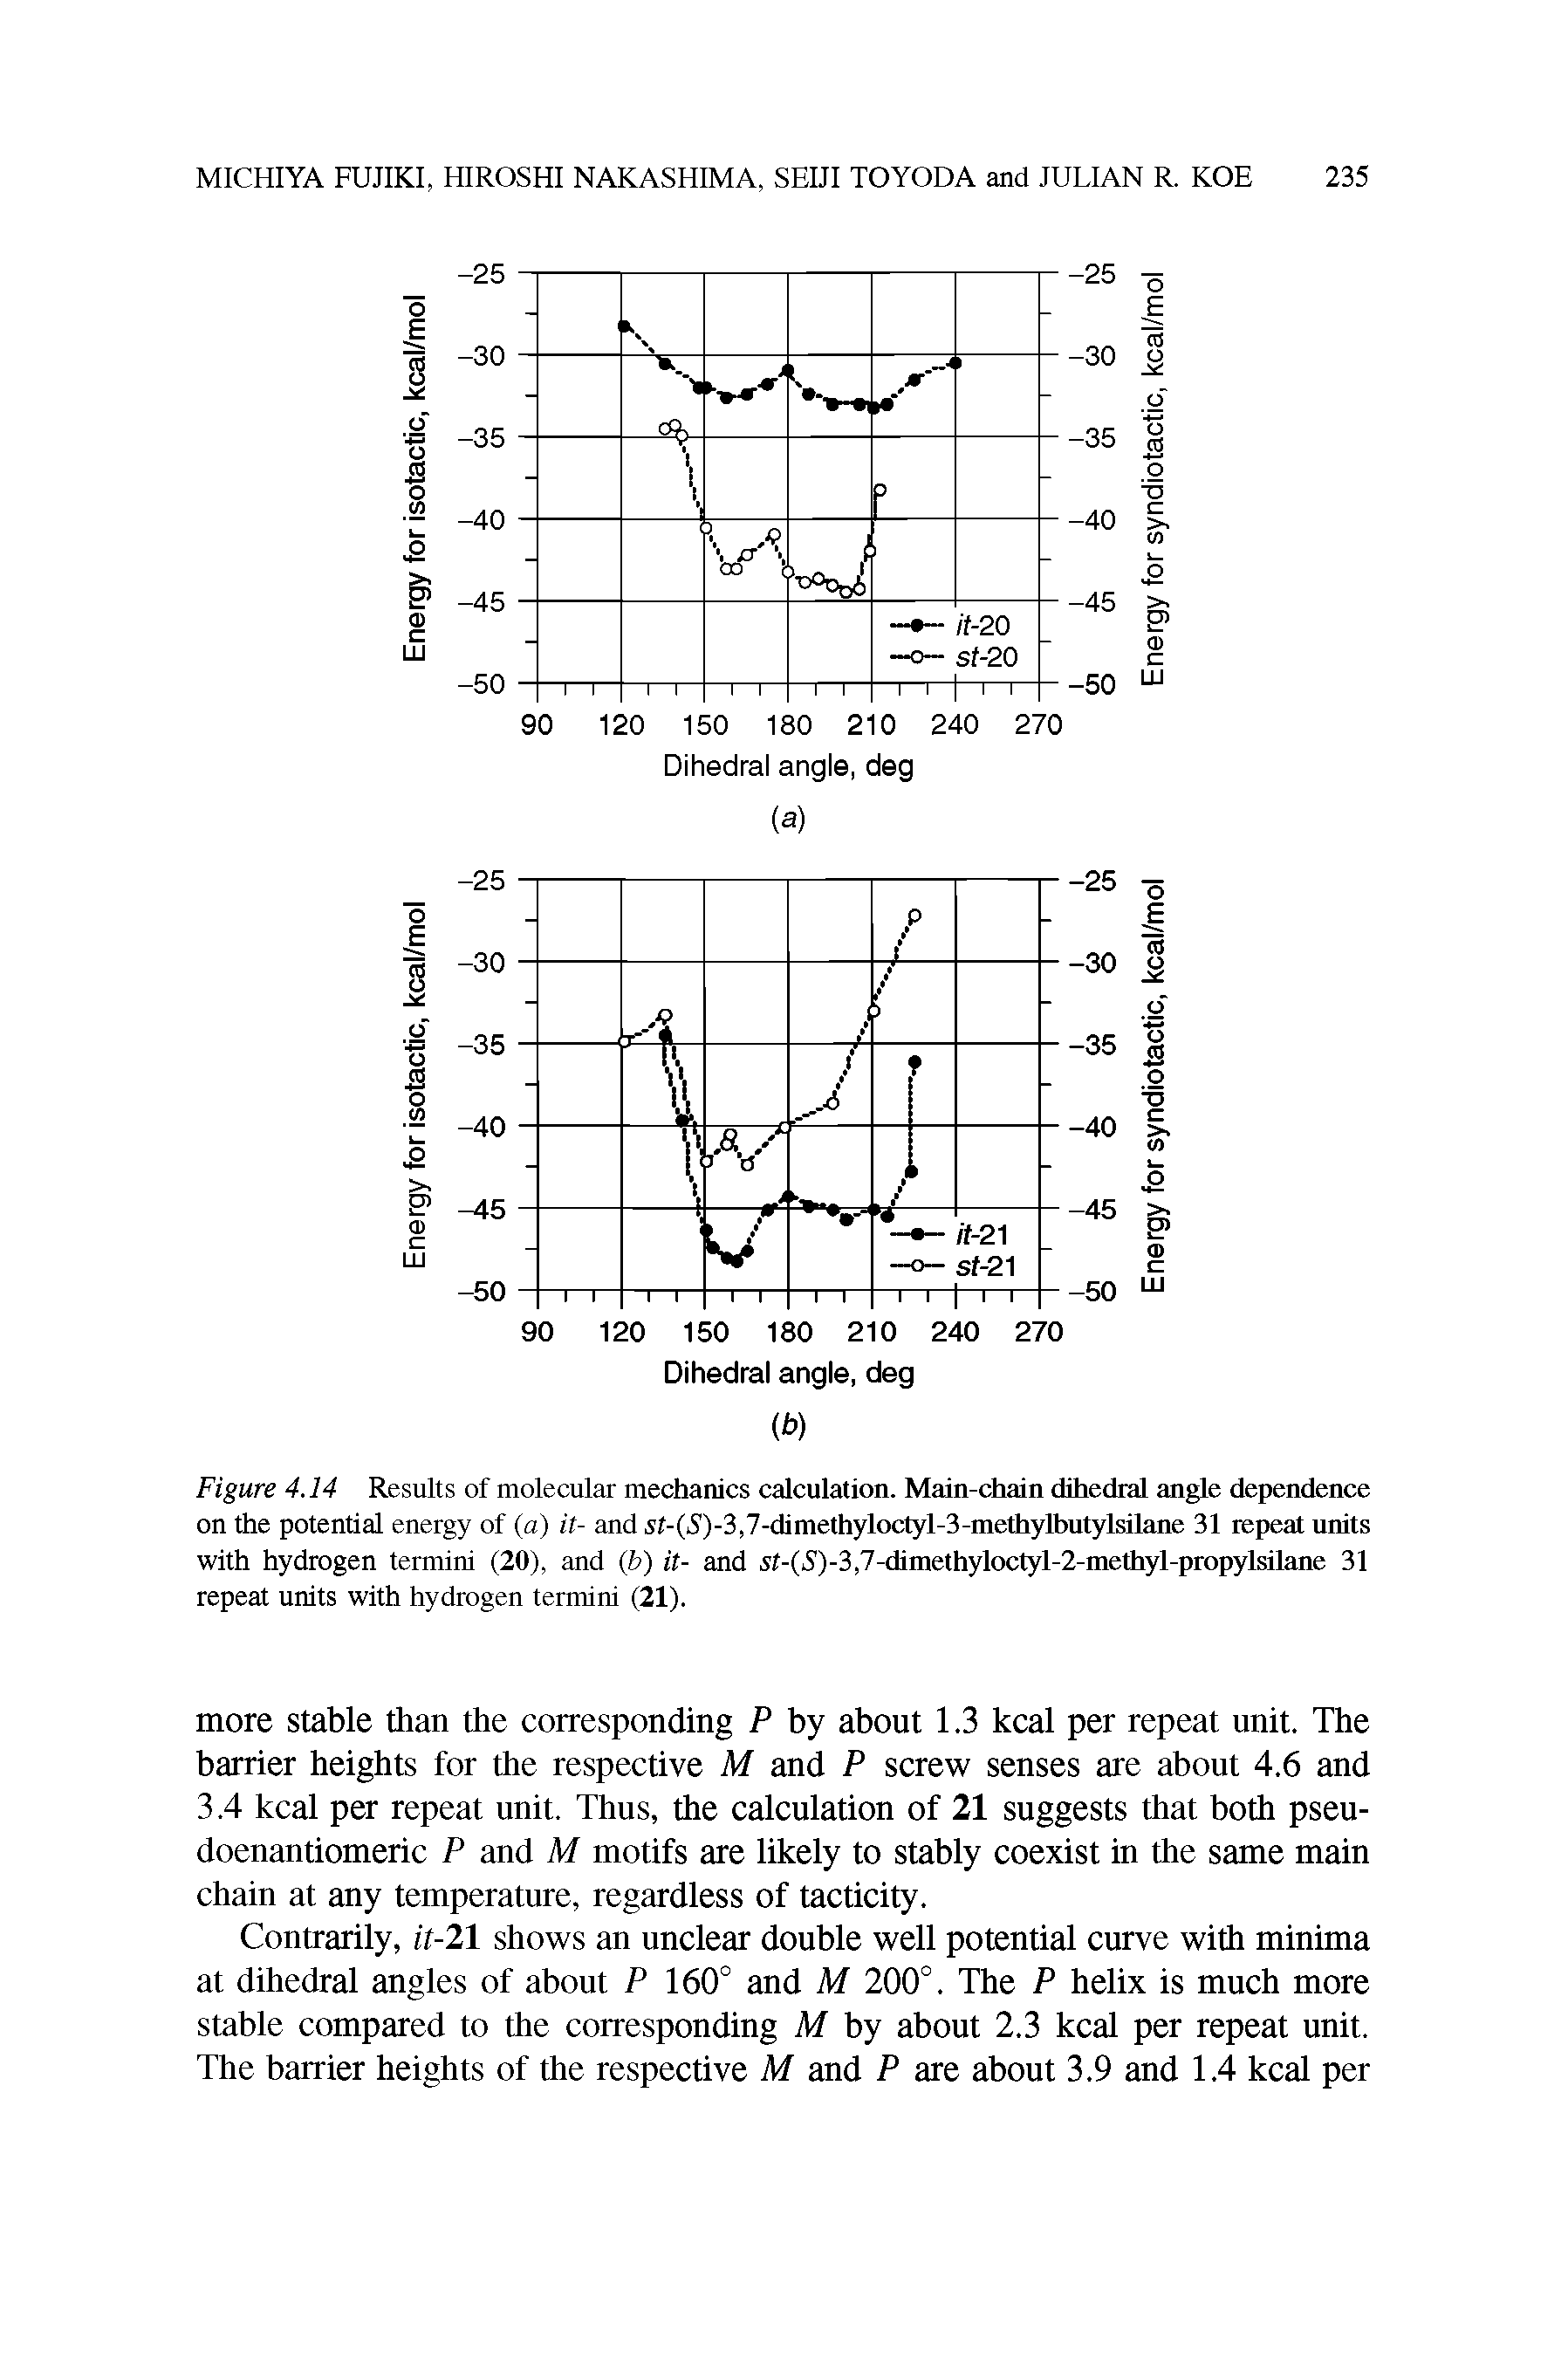 Figure 4.14 Results of molecular mechanics calculation. Main-chain dihedral angle dependence on the potential energy of (a) it- and si-(S)-3,7-dimethyloctyl-3-methylbutylsilane 31 repeat units with hydrogen termini (20), and (b) it- and si-(S)-3,7-dimethyloctyl-2-methyl-propylsilane 31 repeat units with hydrogen termini (21).